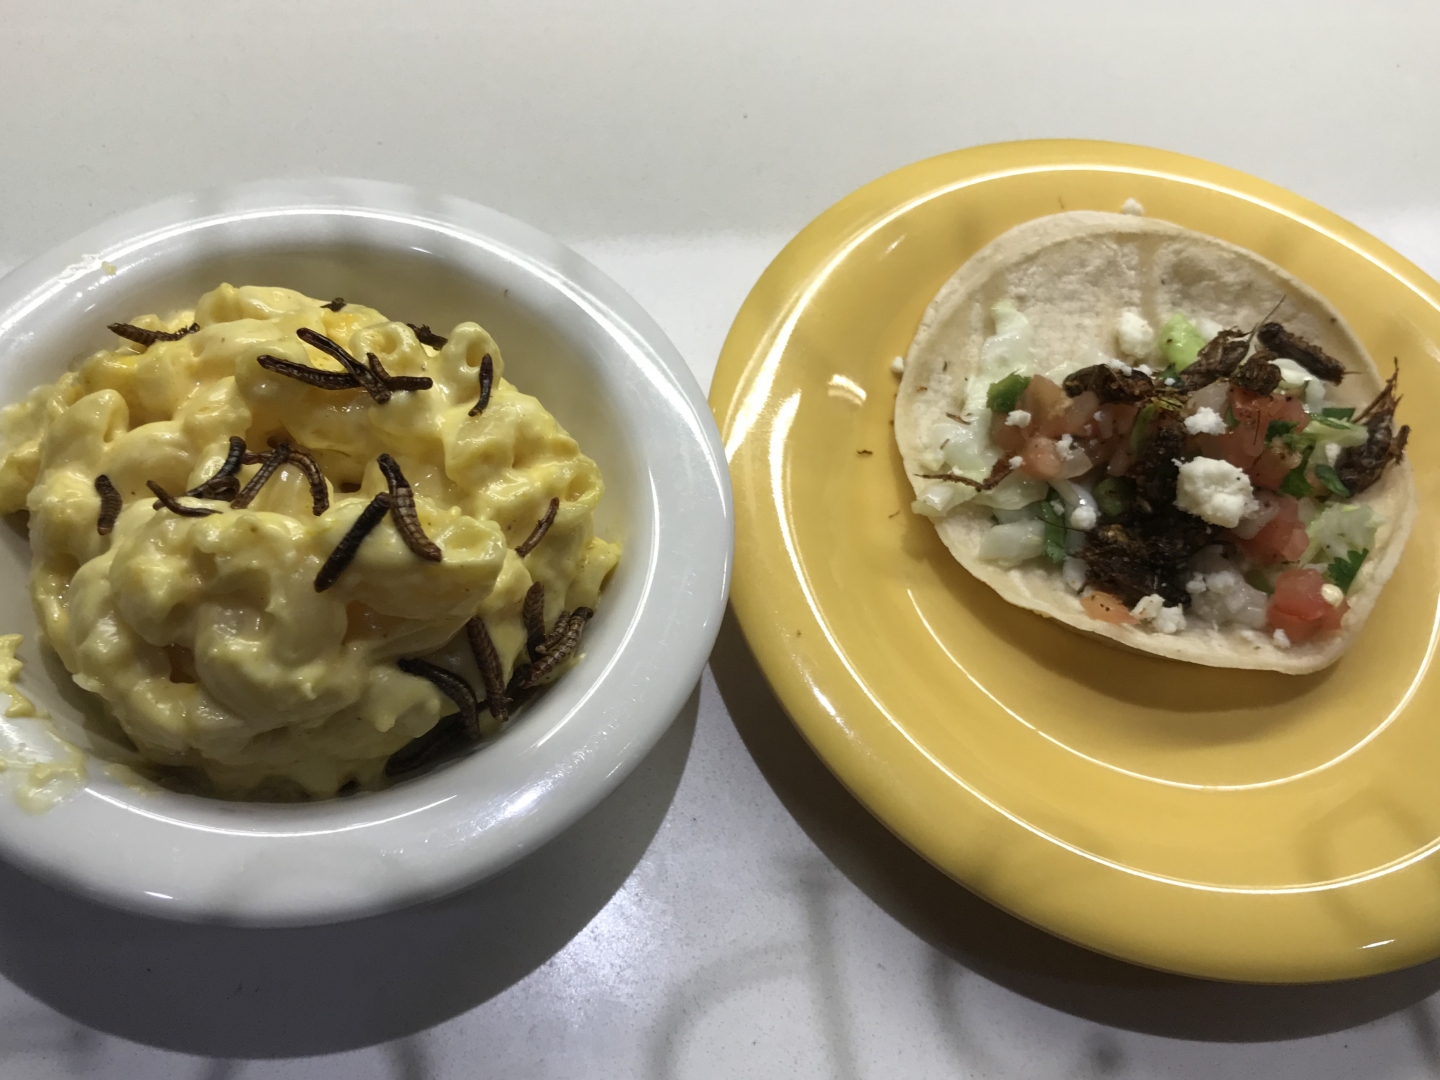 A bowl of mac n' cheese with crunchy worms and a dish with a cricket taco.